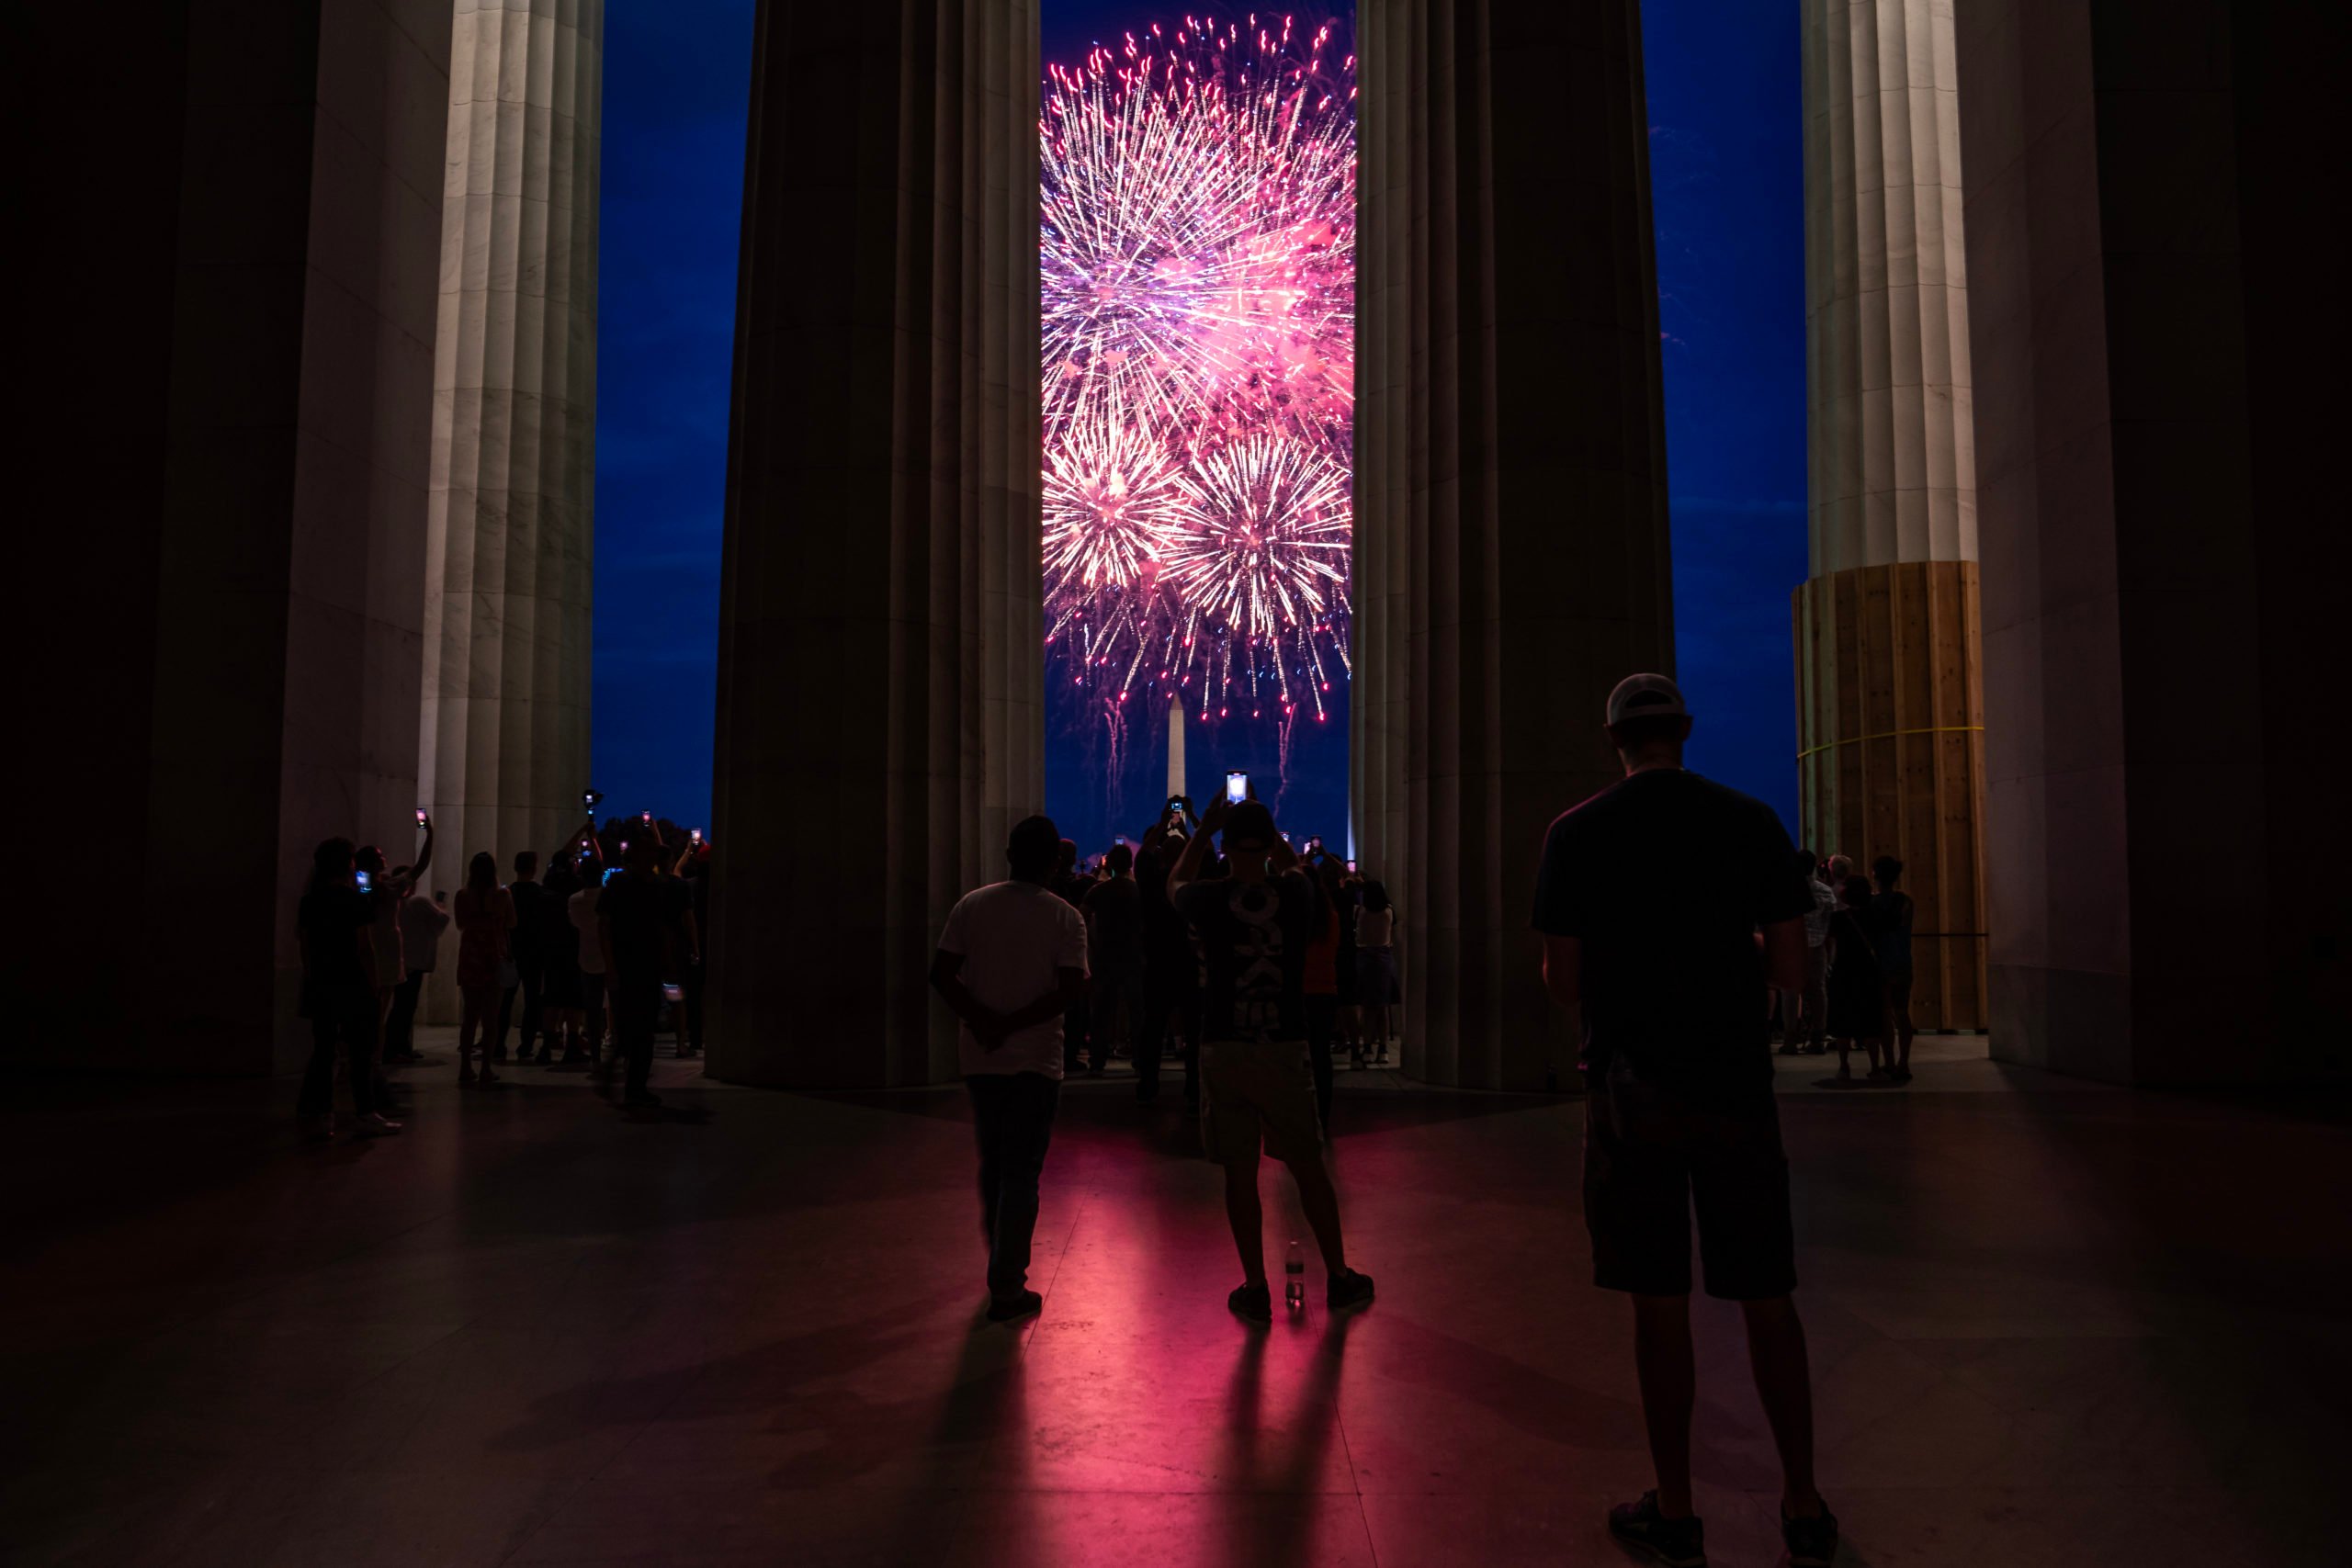 WASHINGTON, DC - JULY 4: Spectators watch as fireworks erupt over the Washington Monument during the Independence Day fireworks display along the National Mall on July 4, 2023 in Washington, DC. Crowds of people came together to partake in the annual event commemorating the Fourth of July celebration. (Photo by Nathan Howard/Getty Images)